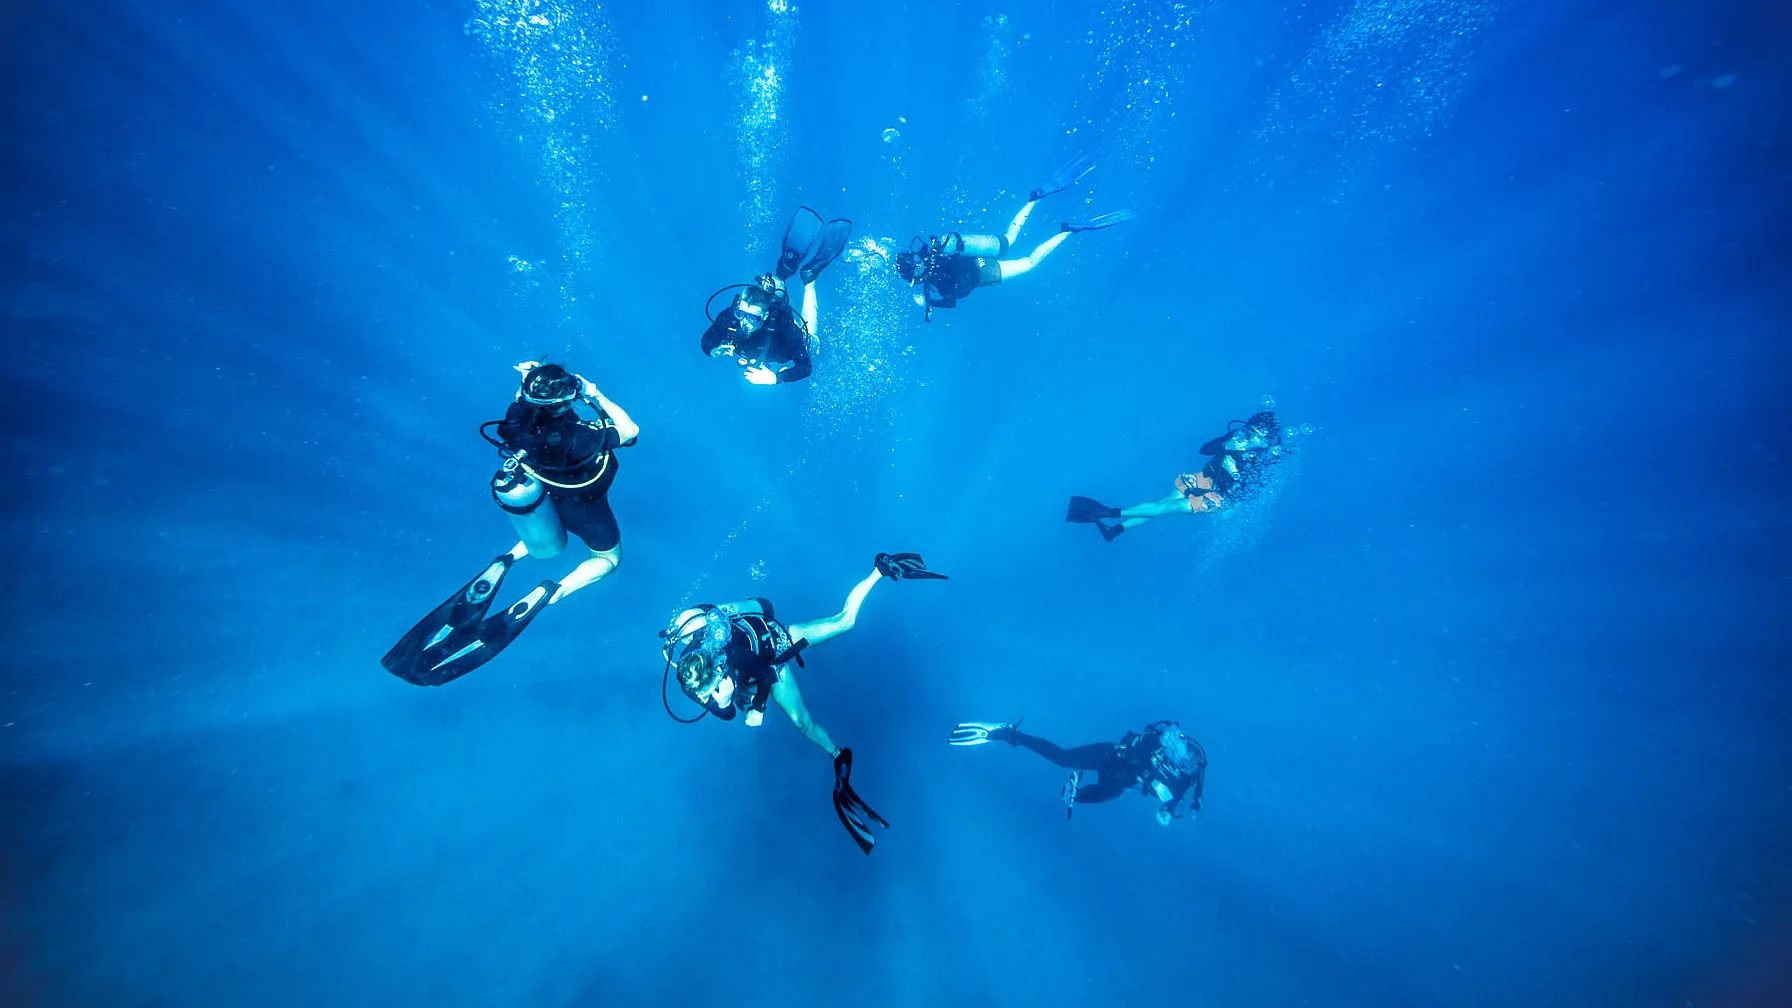 7 Fun Facts About Scuba Diving